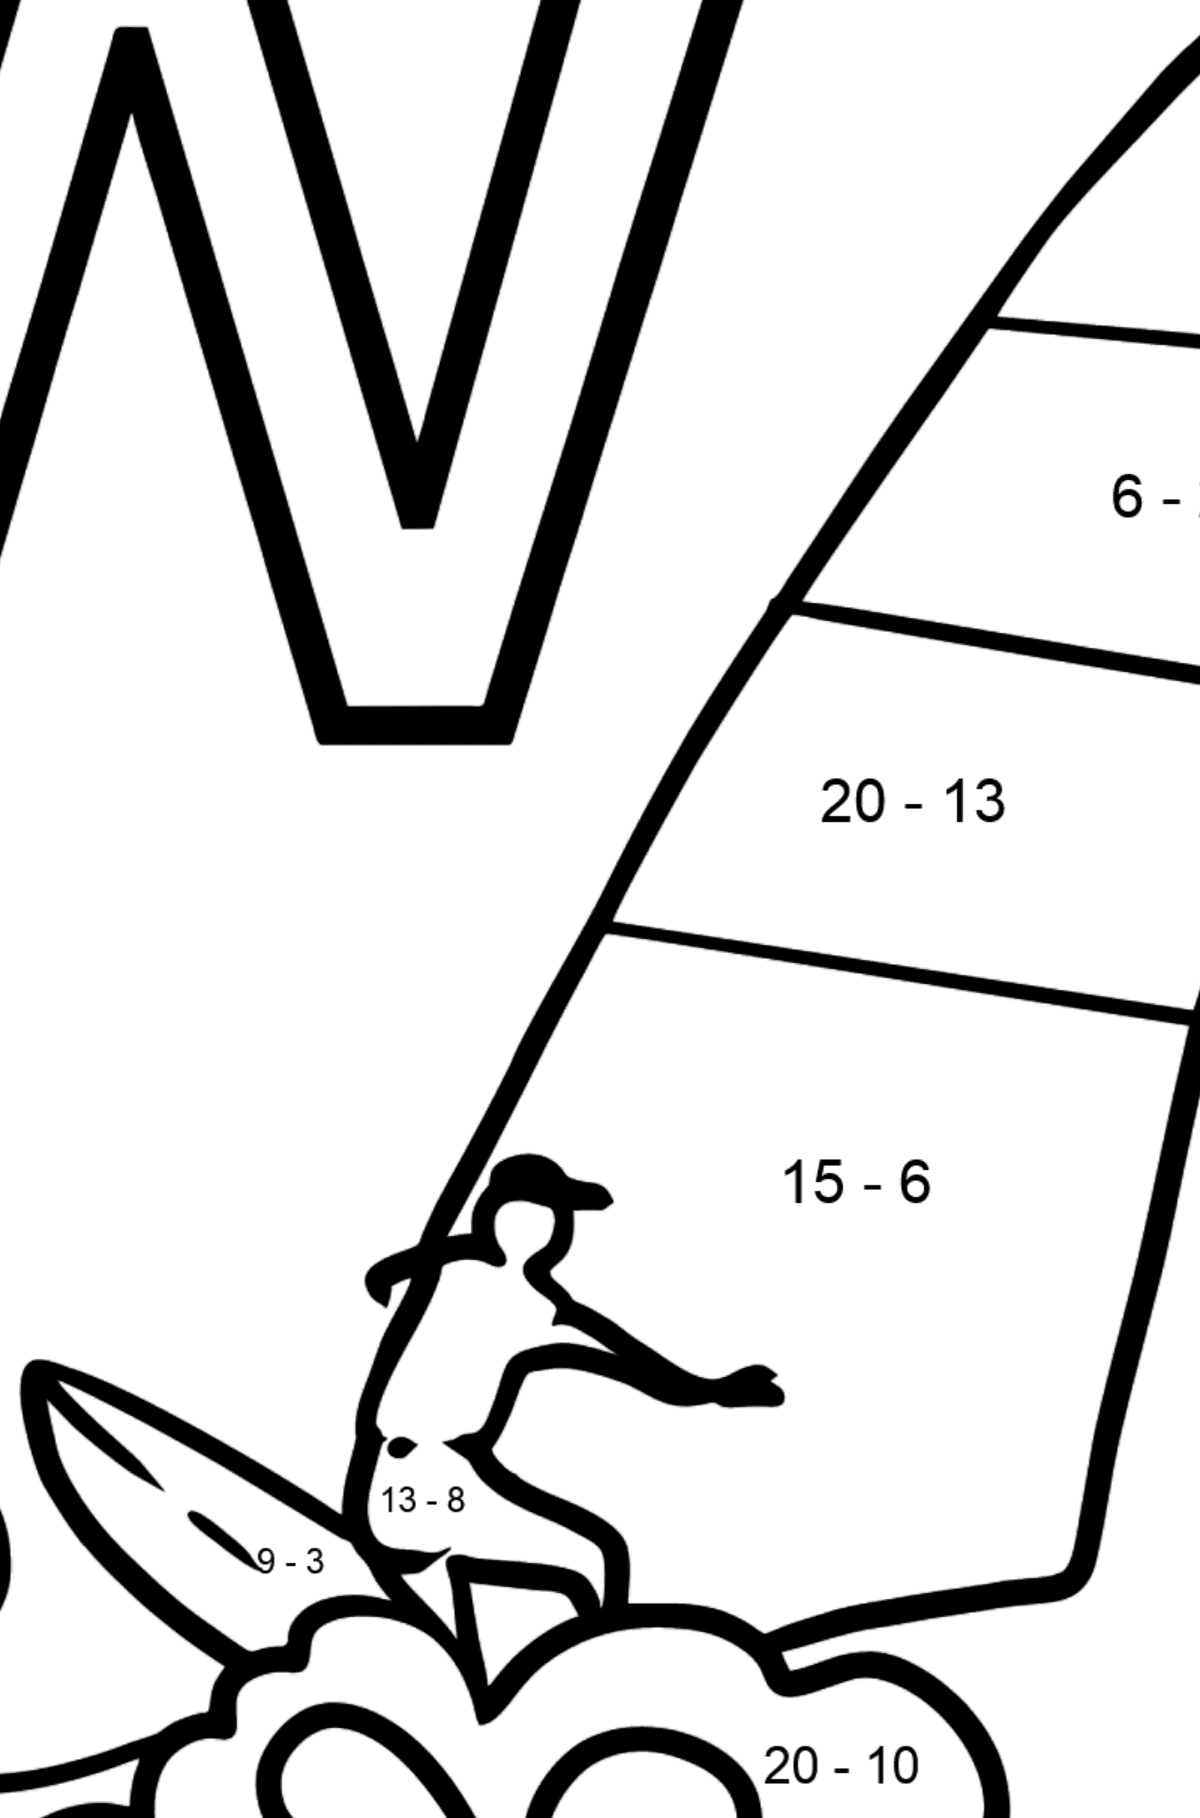 Spanish Letter W coloring pages - WINDSURF - Math Coloring - Subtraction for Kids